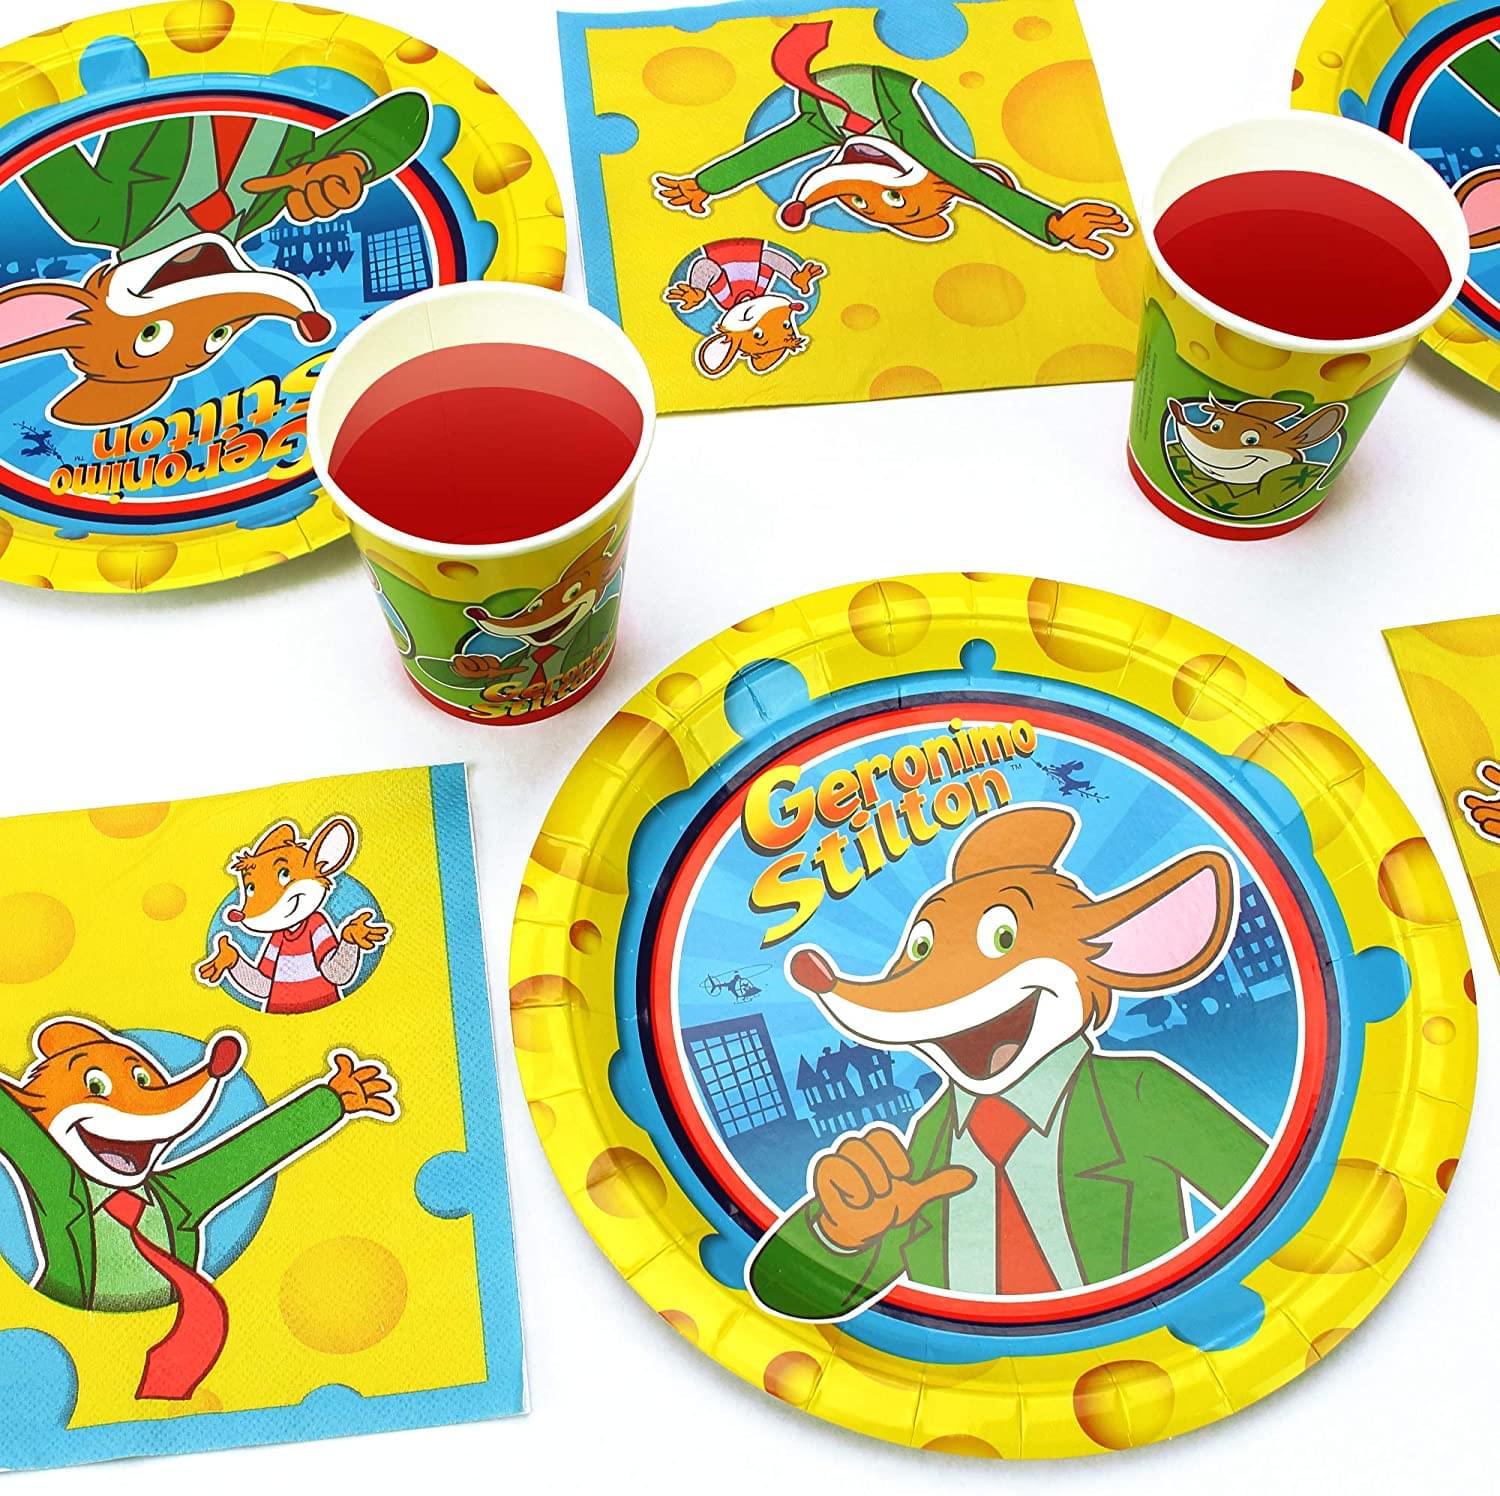 Geronimo Stilton Birthday Party Supplies Pack | 58 Pieces | Serves 8 Guests